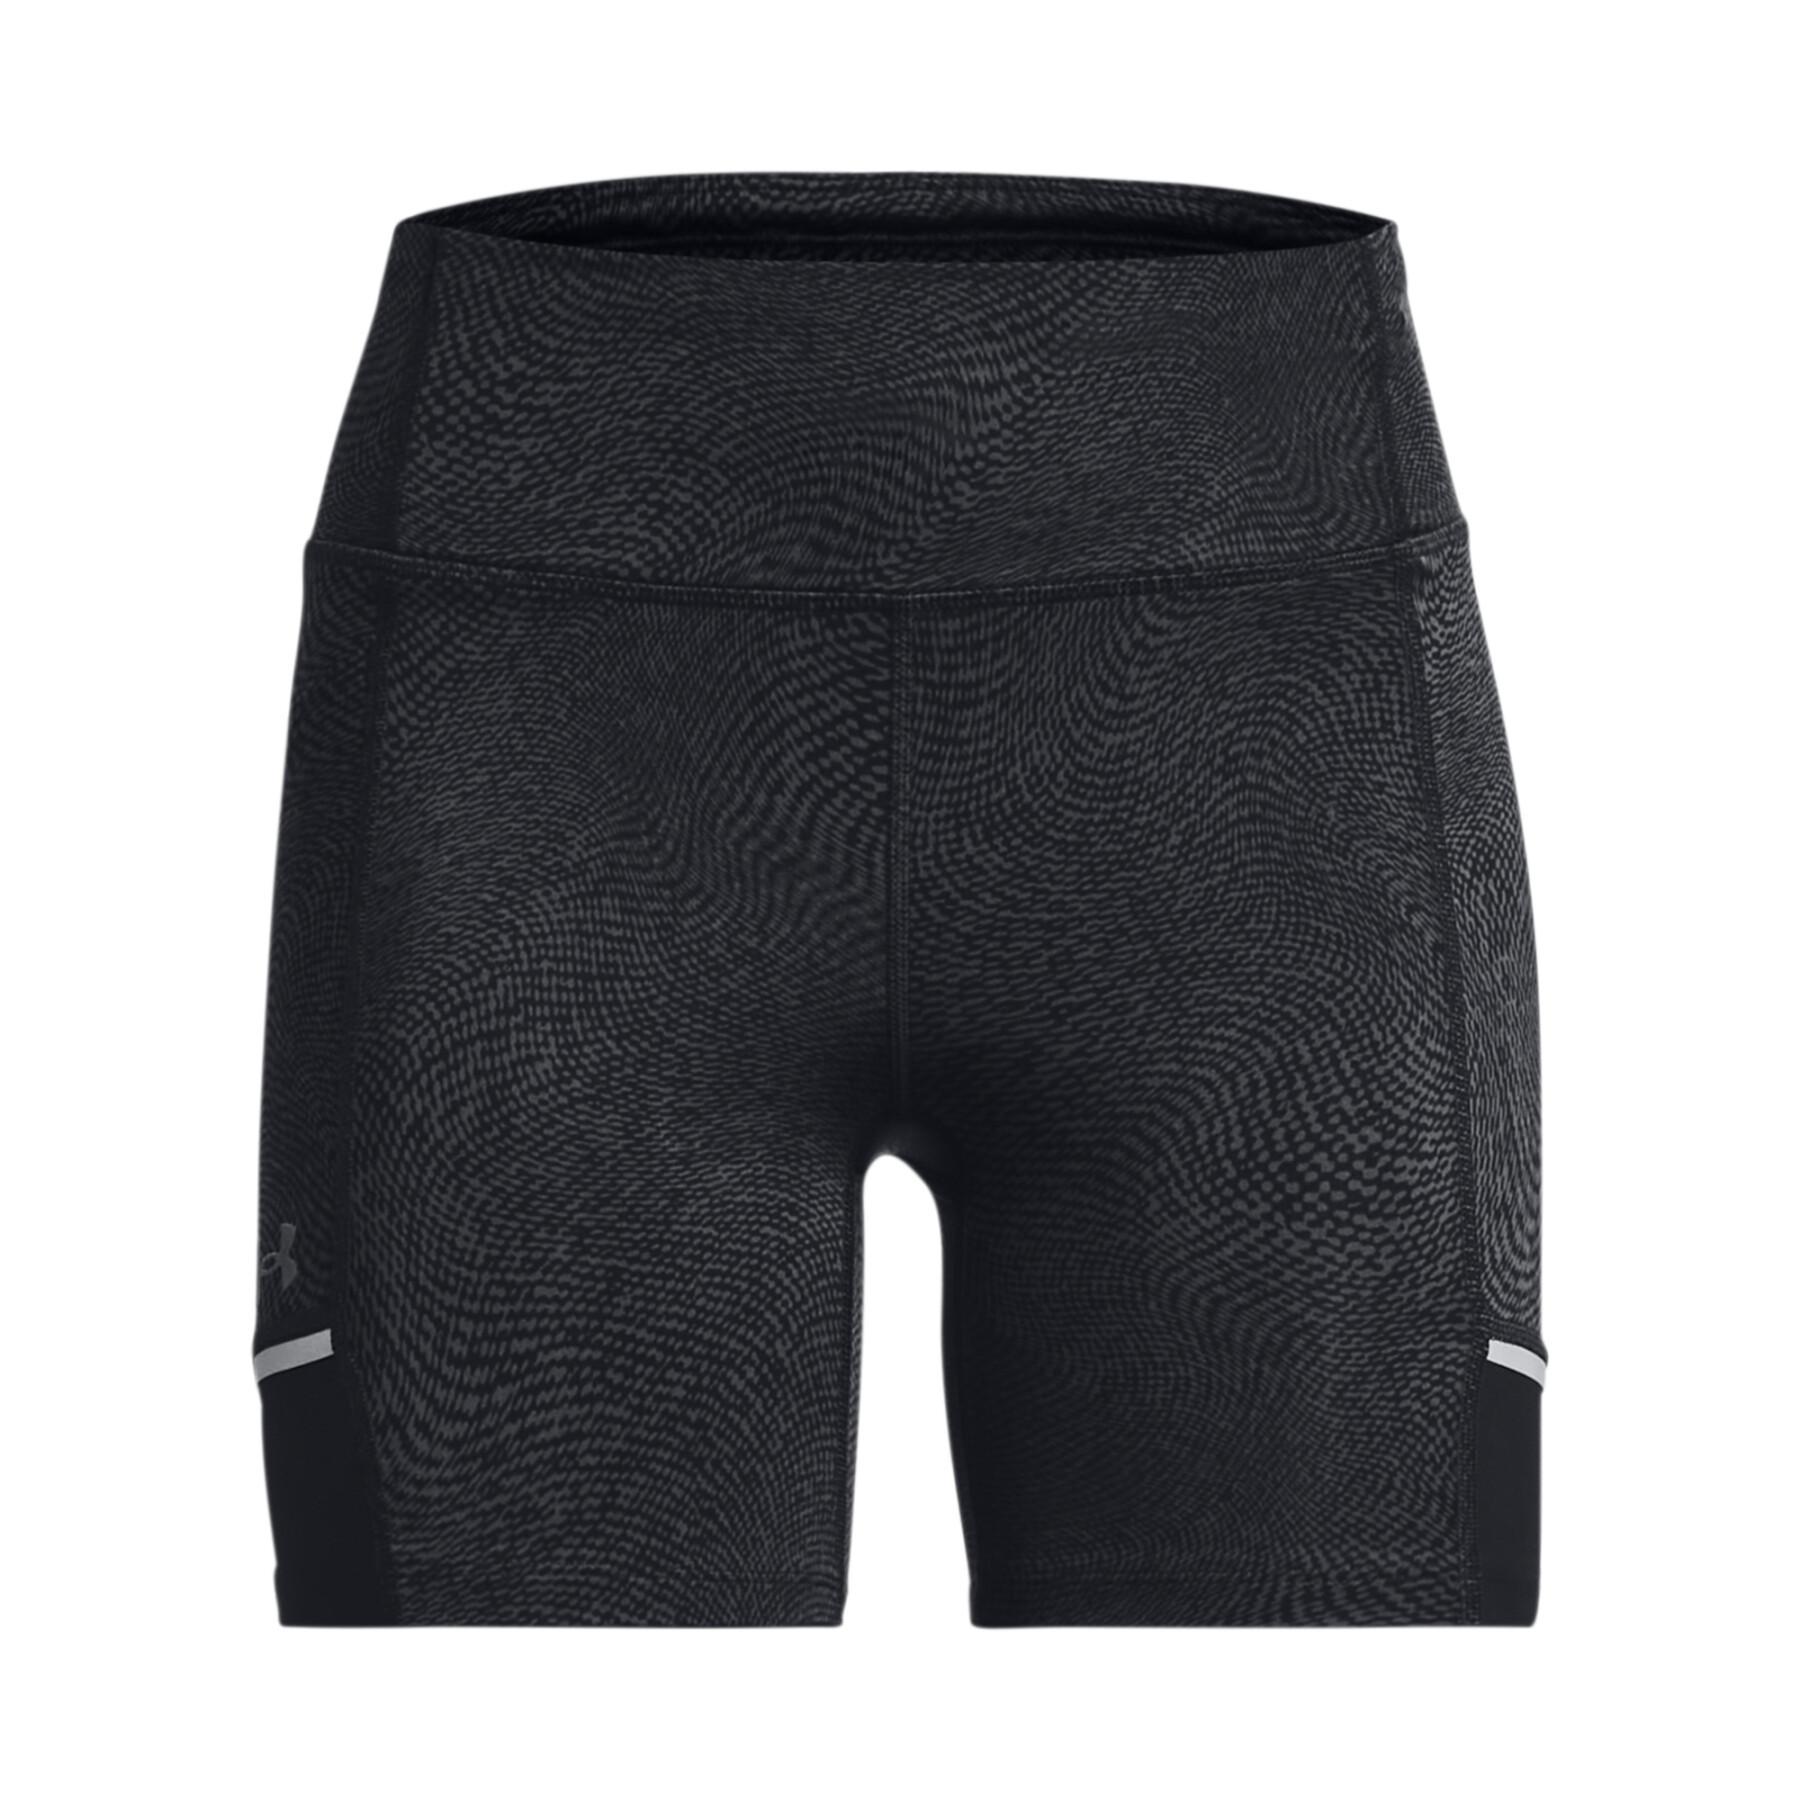 Under Armour Fly Fast 3.0 running tight shorts in black print